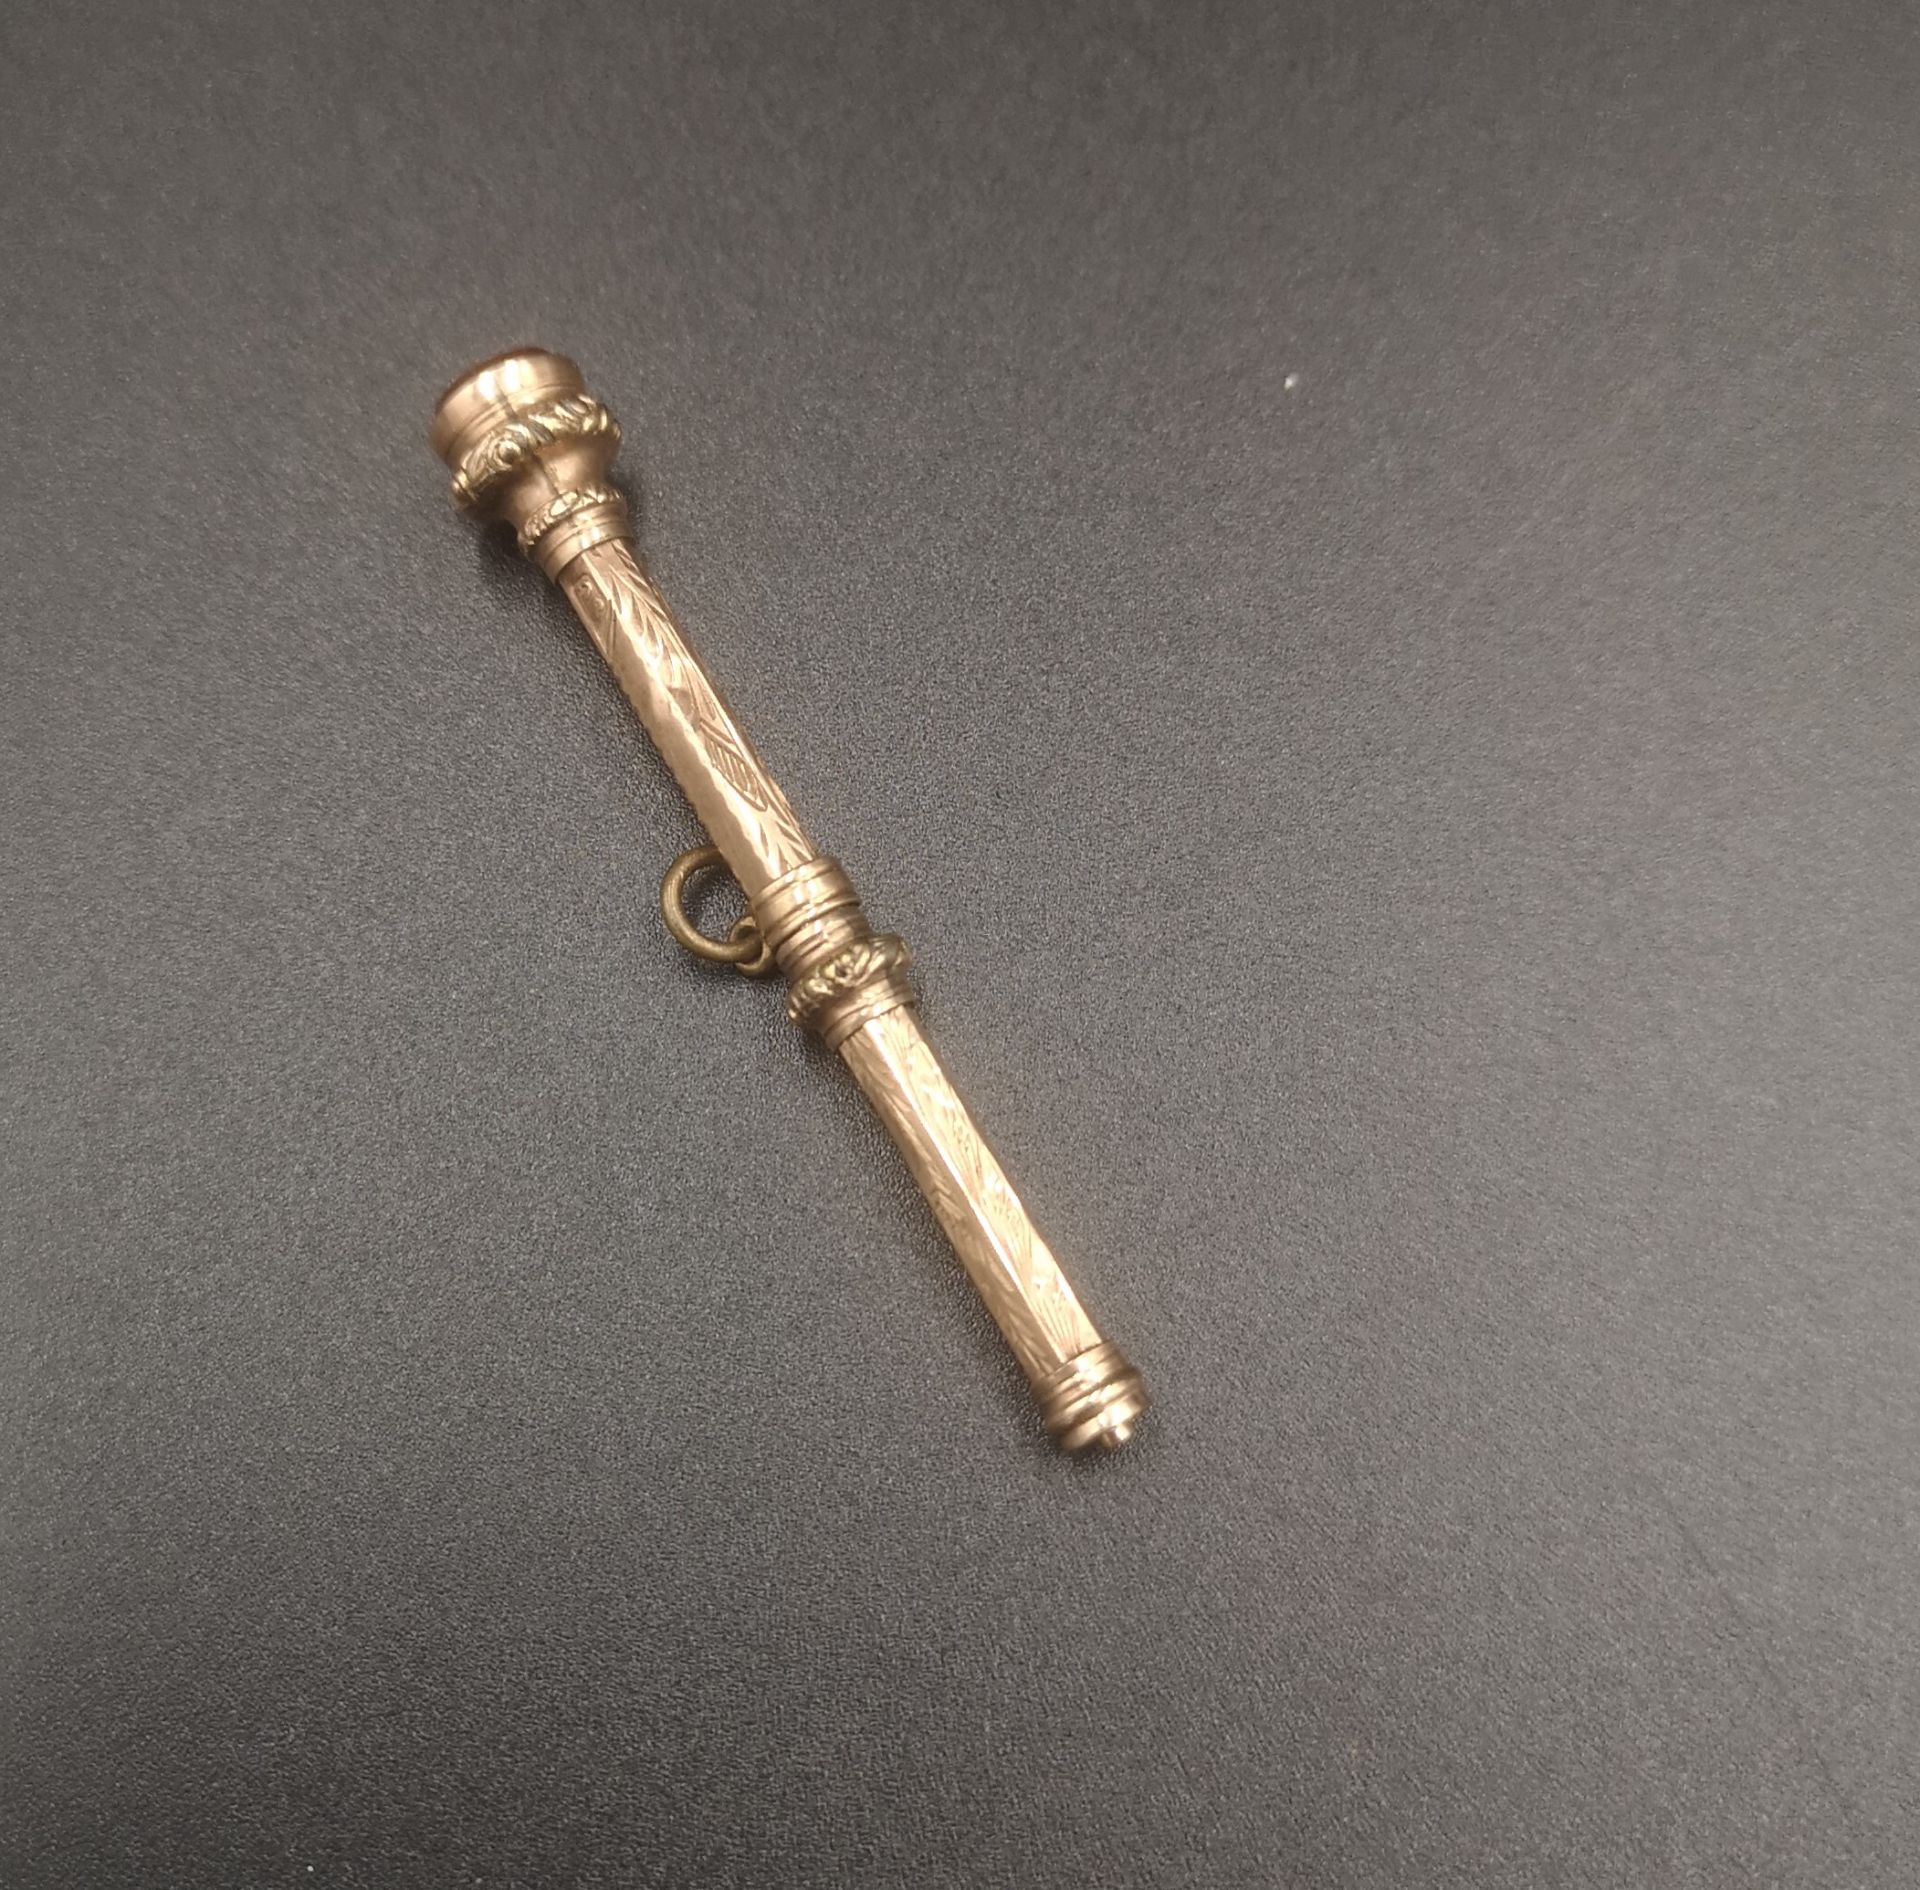 Victorian gold mechanical pencil - Image 2 of 5